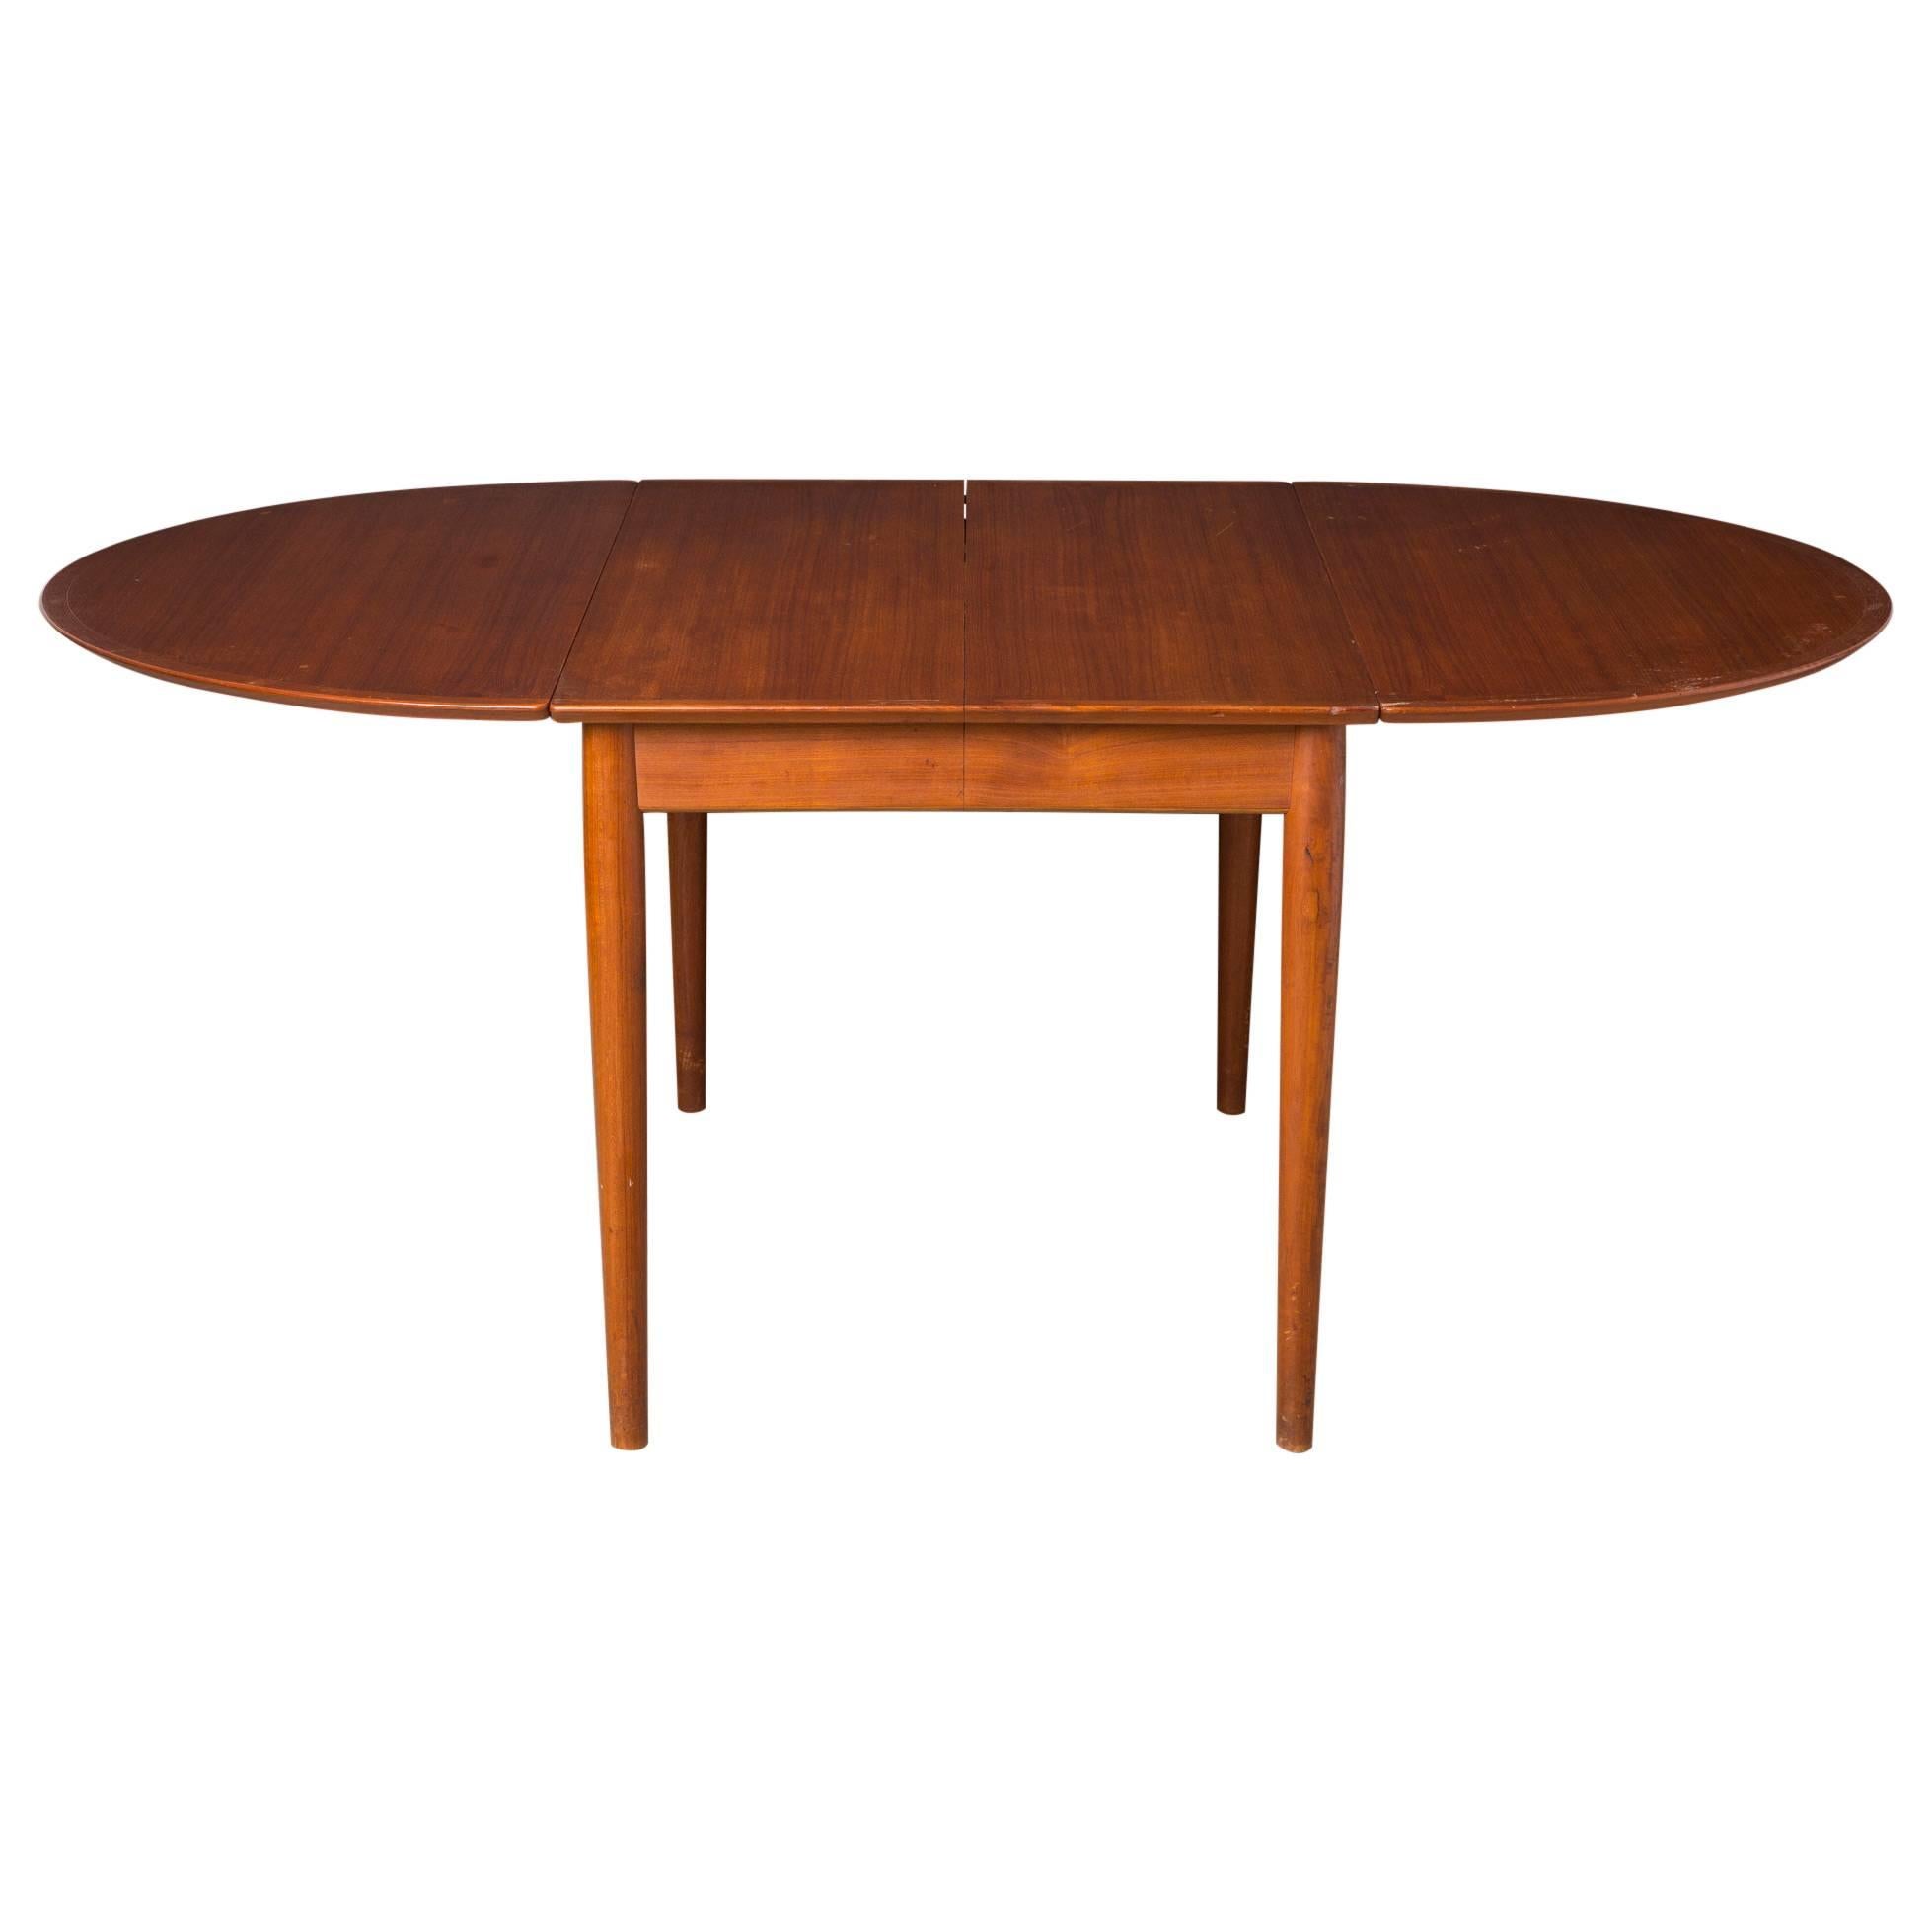 Authentic 1960s Arne Vodder design for Sibast. A Danish modern extendable dining or game table with rounded drop leaf sides. Perfect for a breakfast nook, and expands to accommodate large parties.  